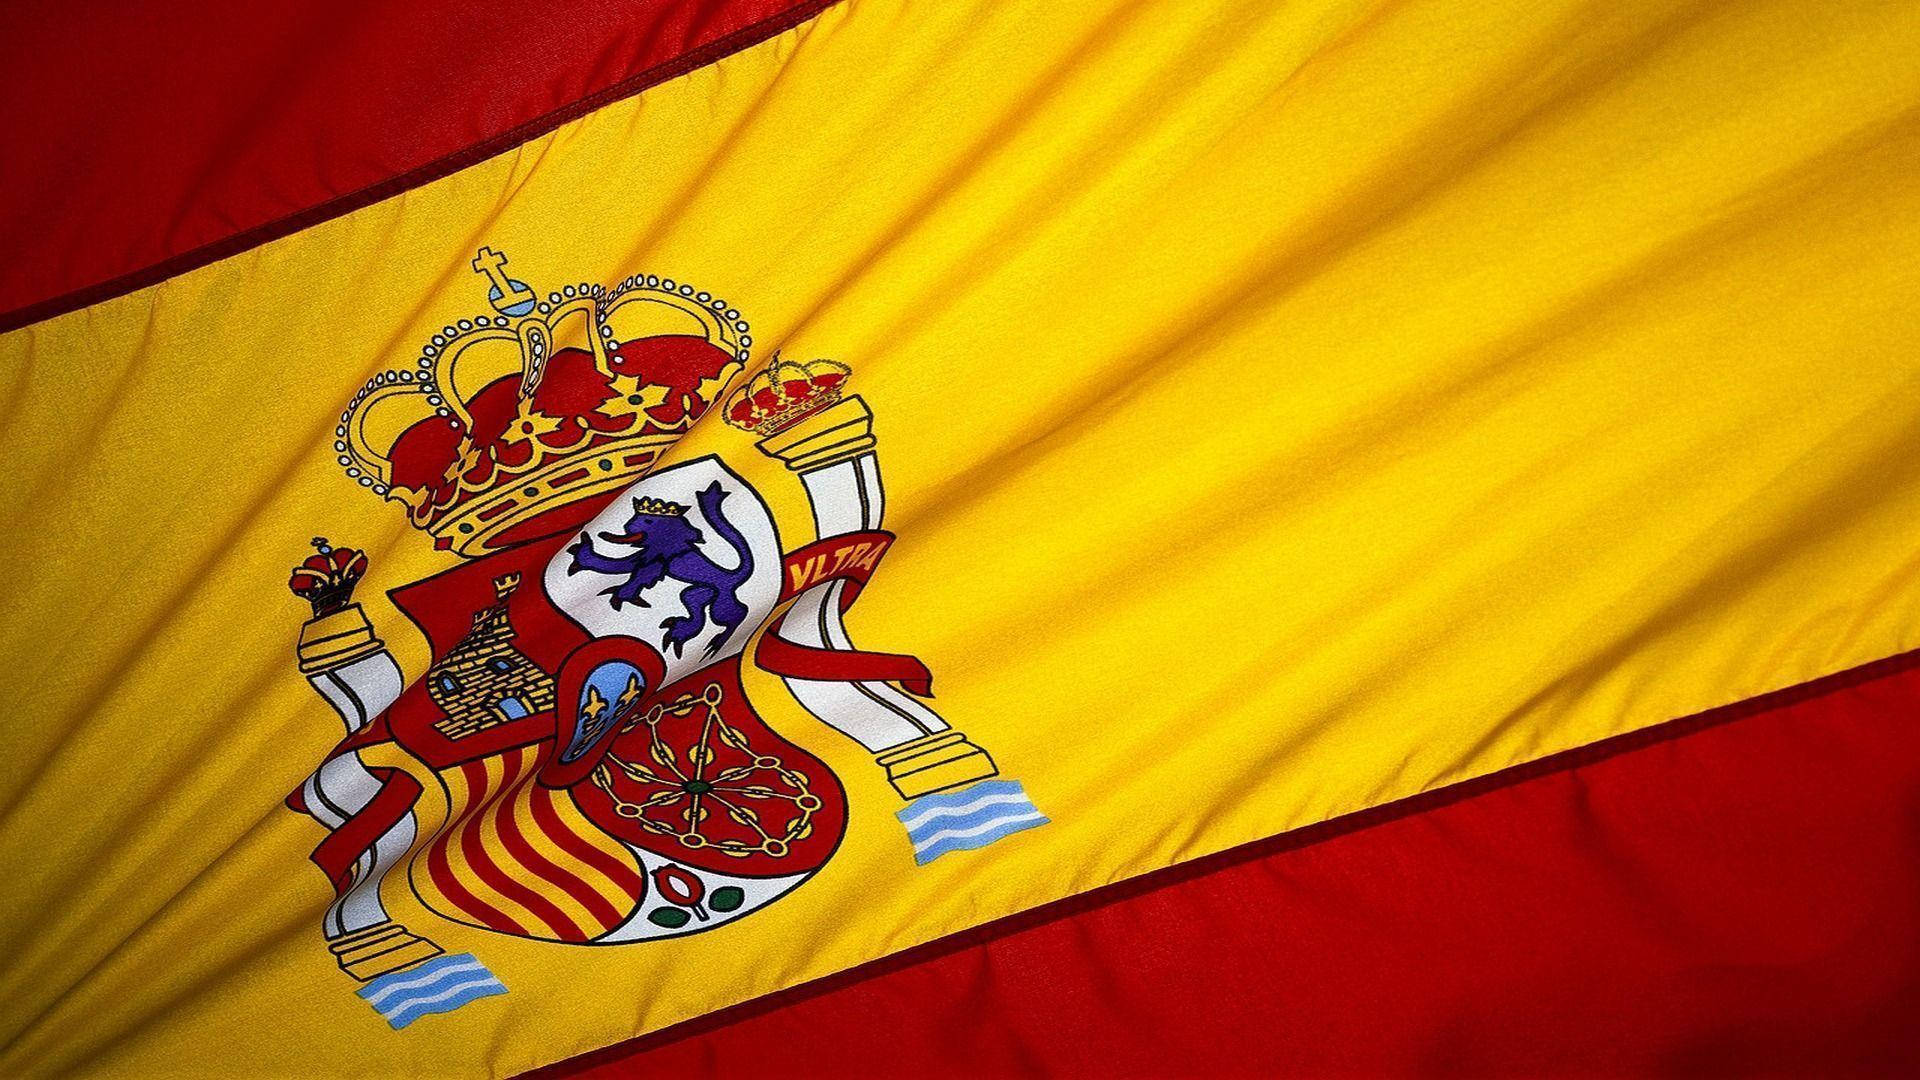 Free Spain Flag Wallpaper Downloads, [100+] Spain Flag Wallpapers for FREE  